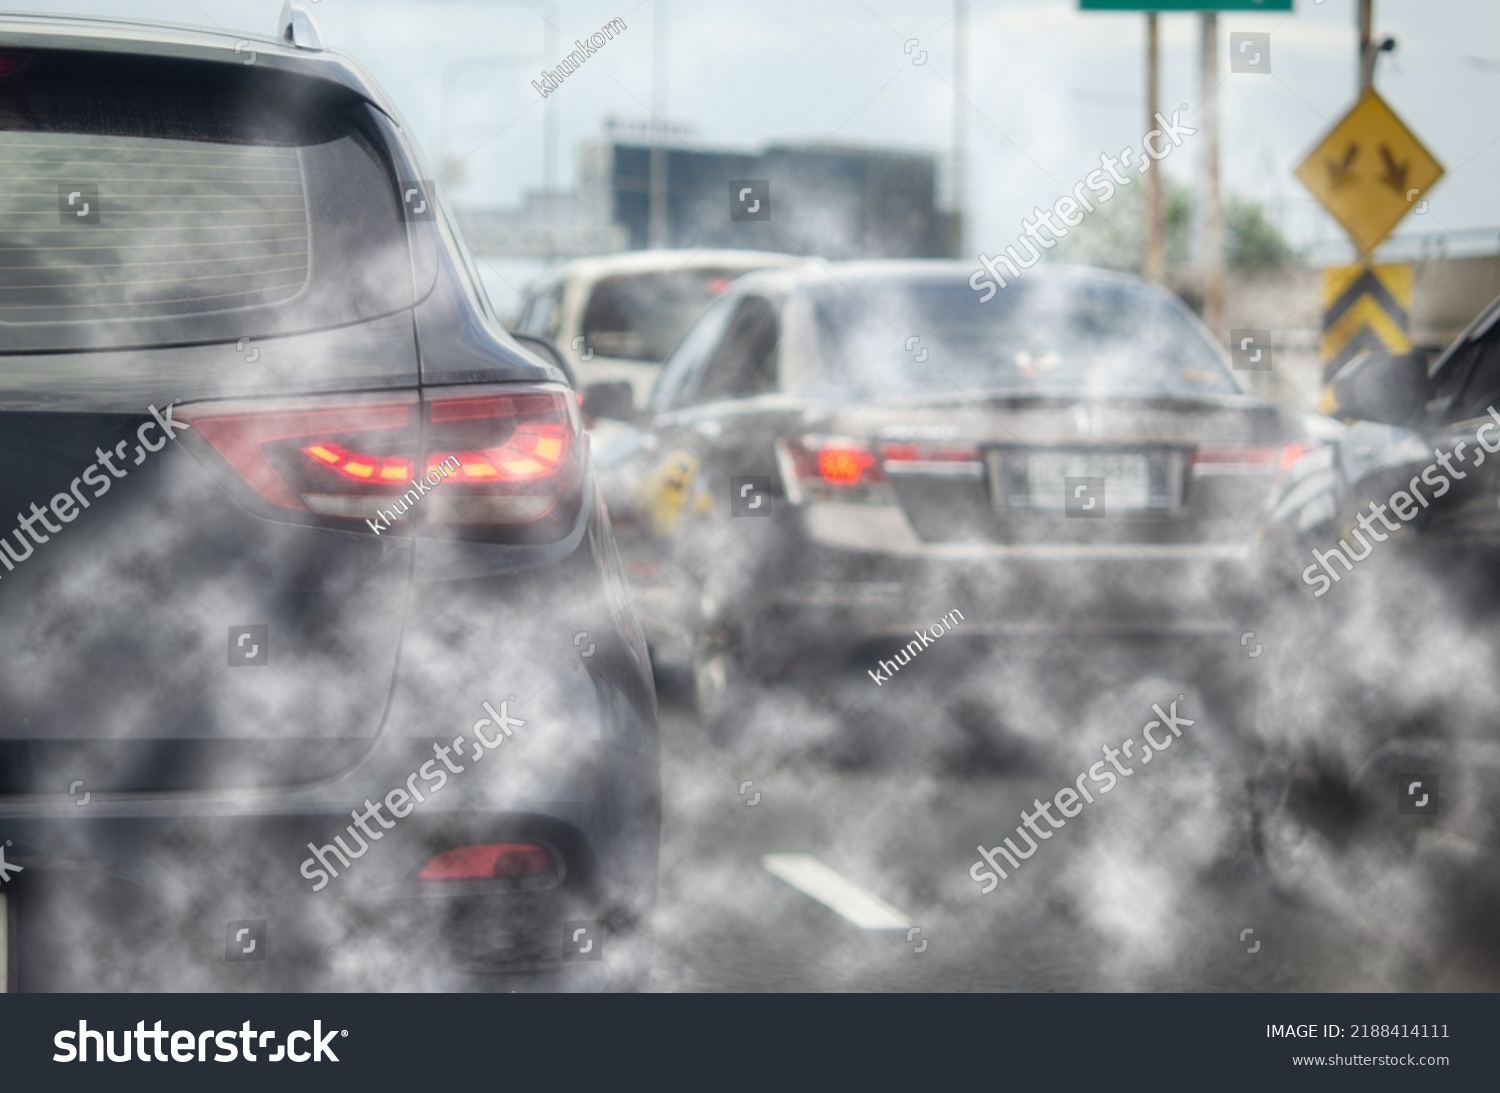 Car Exhaust Fumes During Traffic Jams Stock Photo 2188414111 | Shutterstock